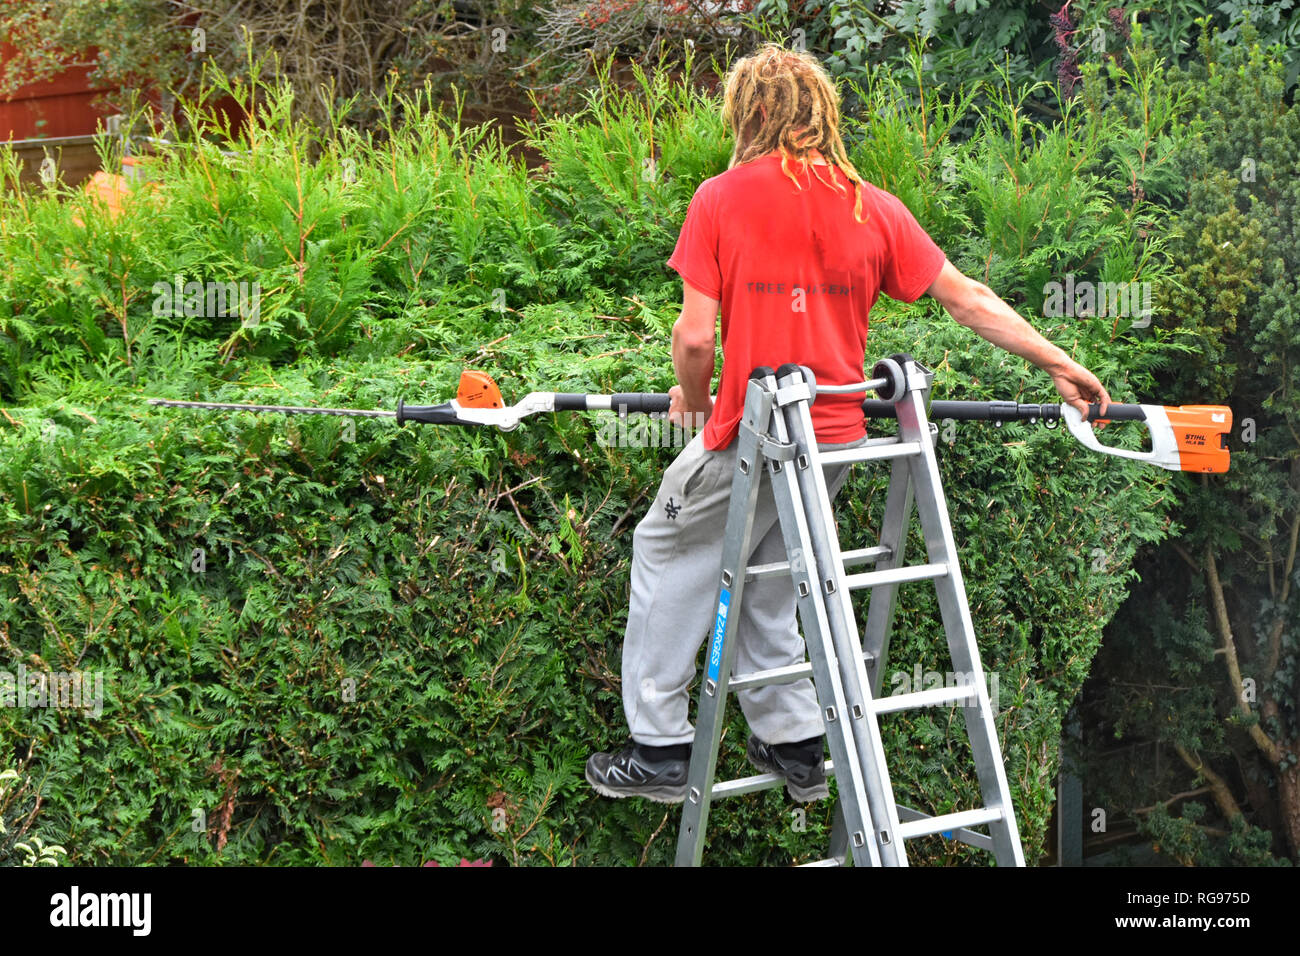 Back view Arborist working on ladder long reach telescopic battery powered cordless hedge cutter tool trimming thuja plicata conifer hedge England UK Stock Photo